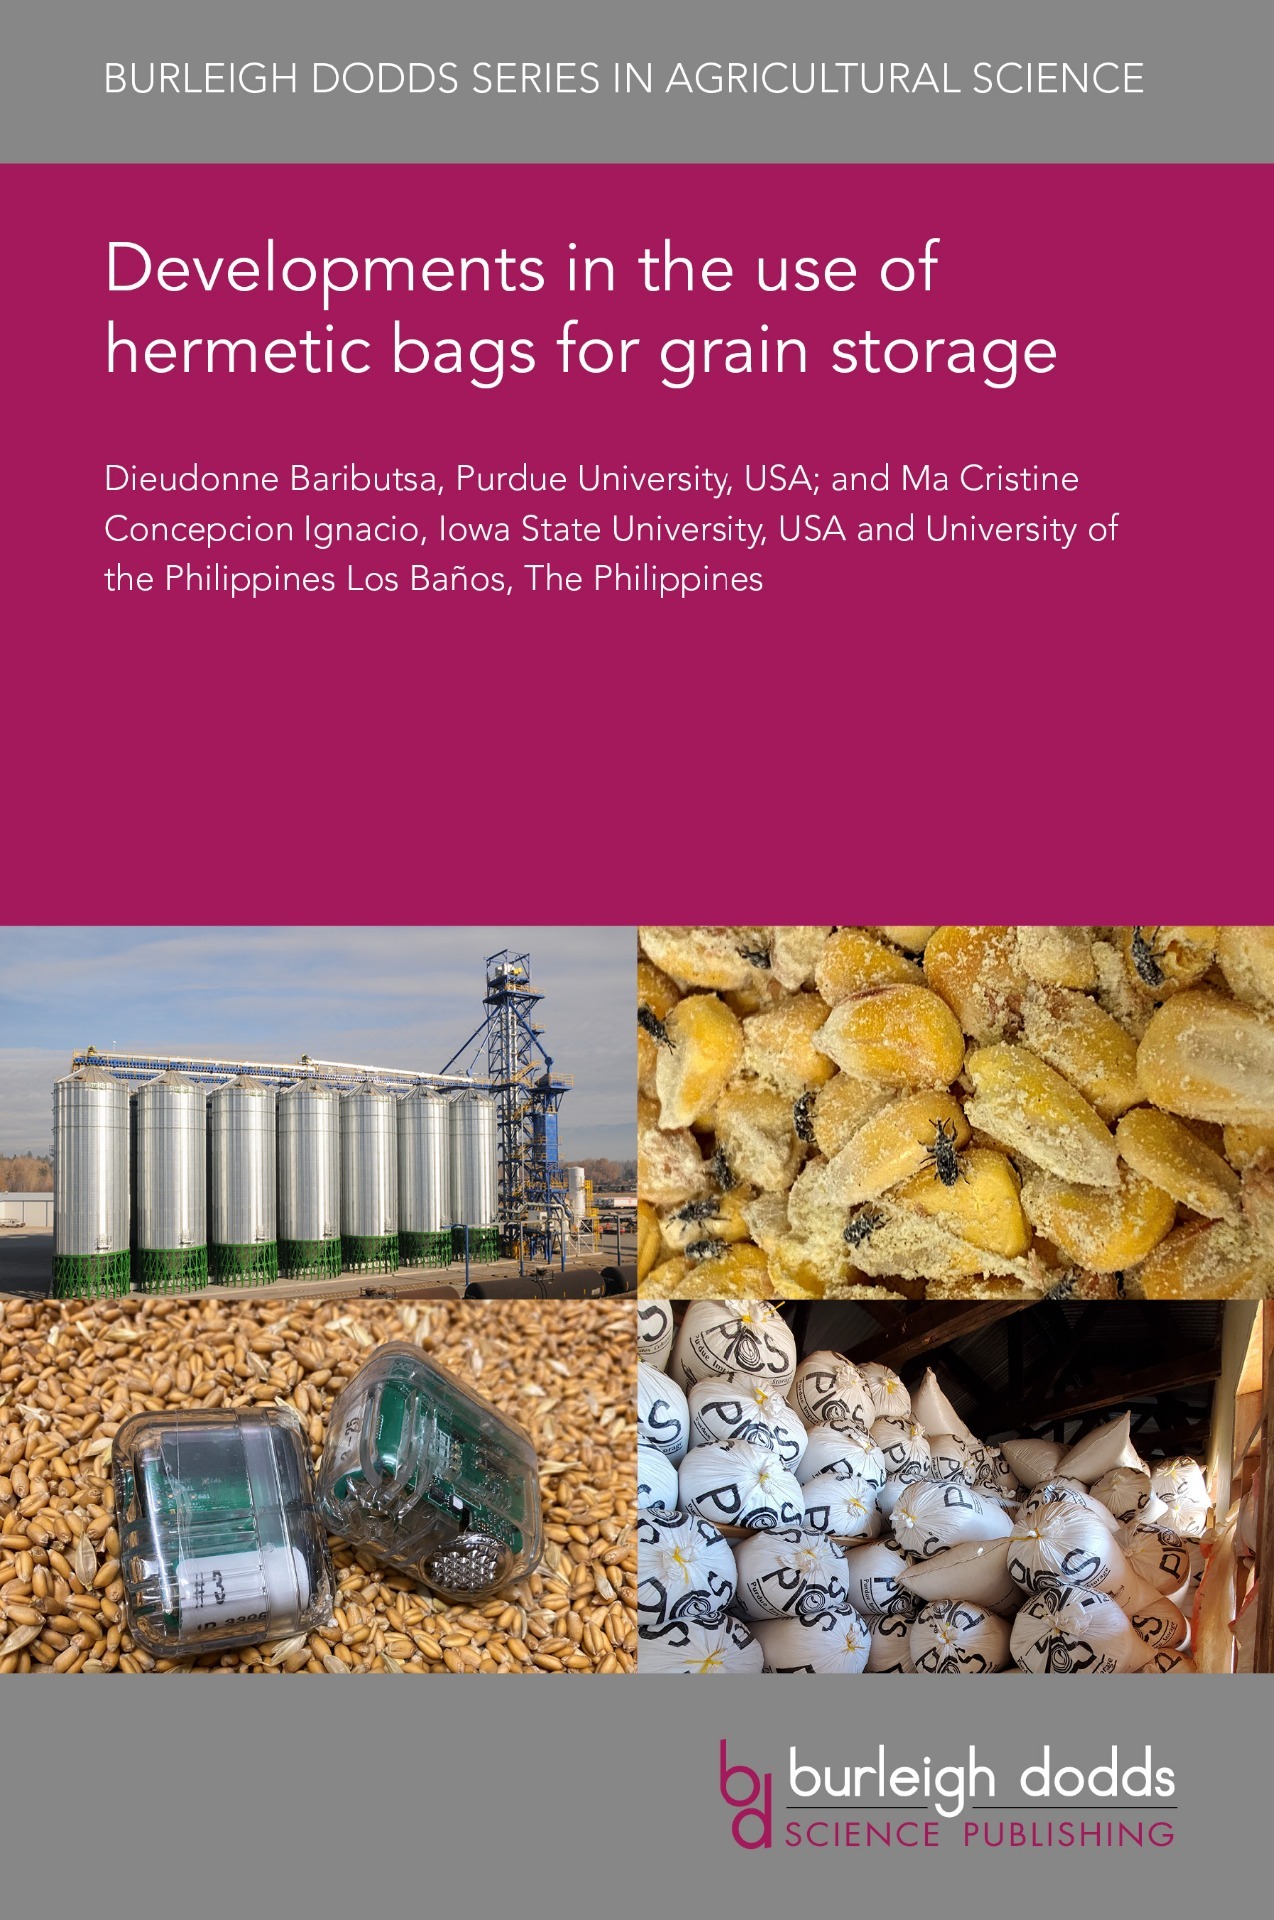 Developments in the use of hermetic bags for grain storage